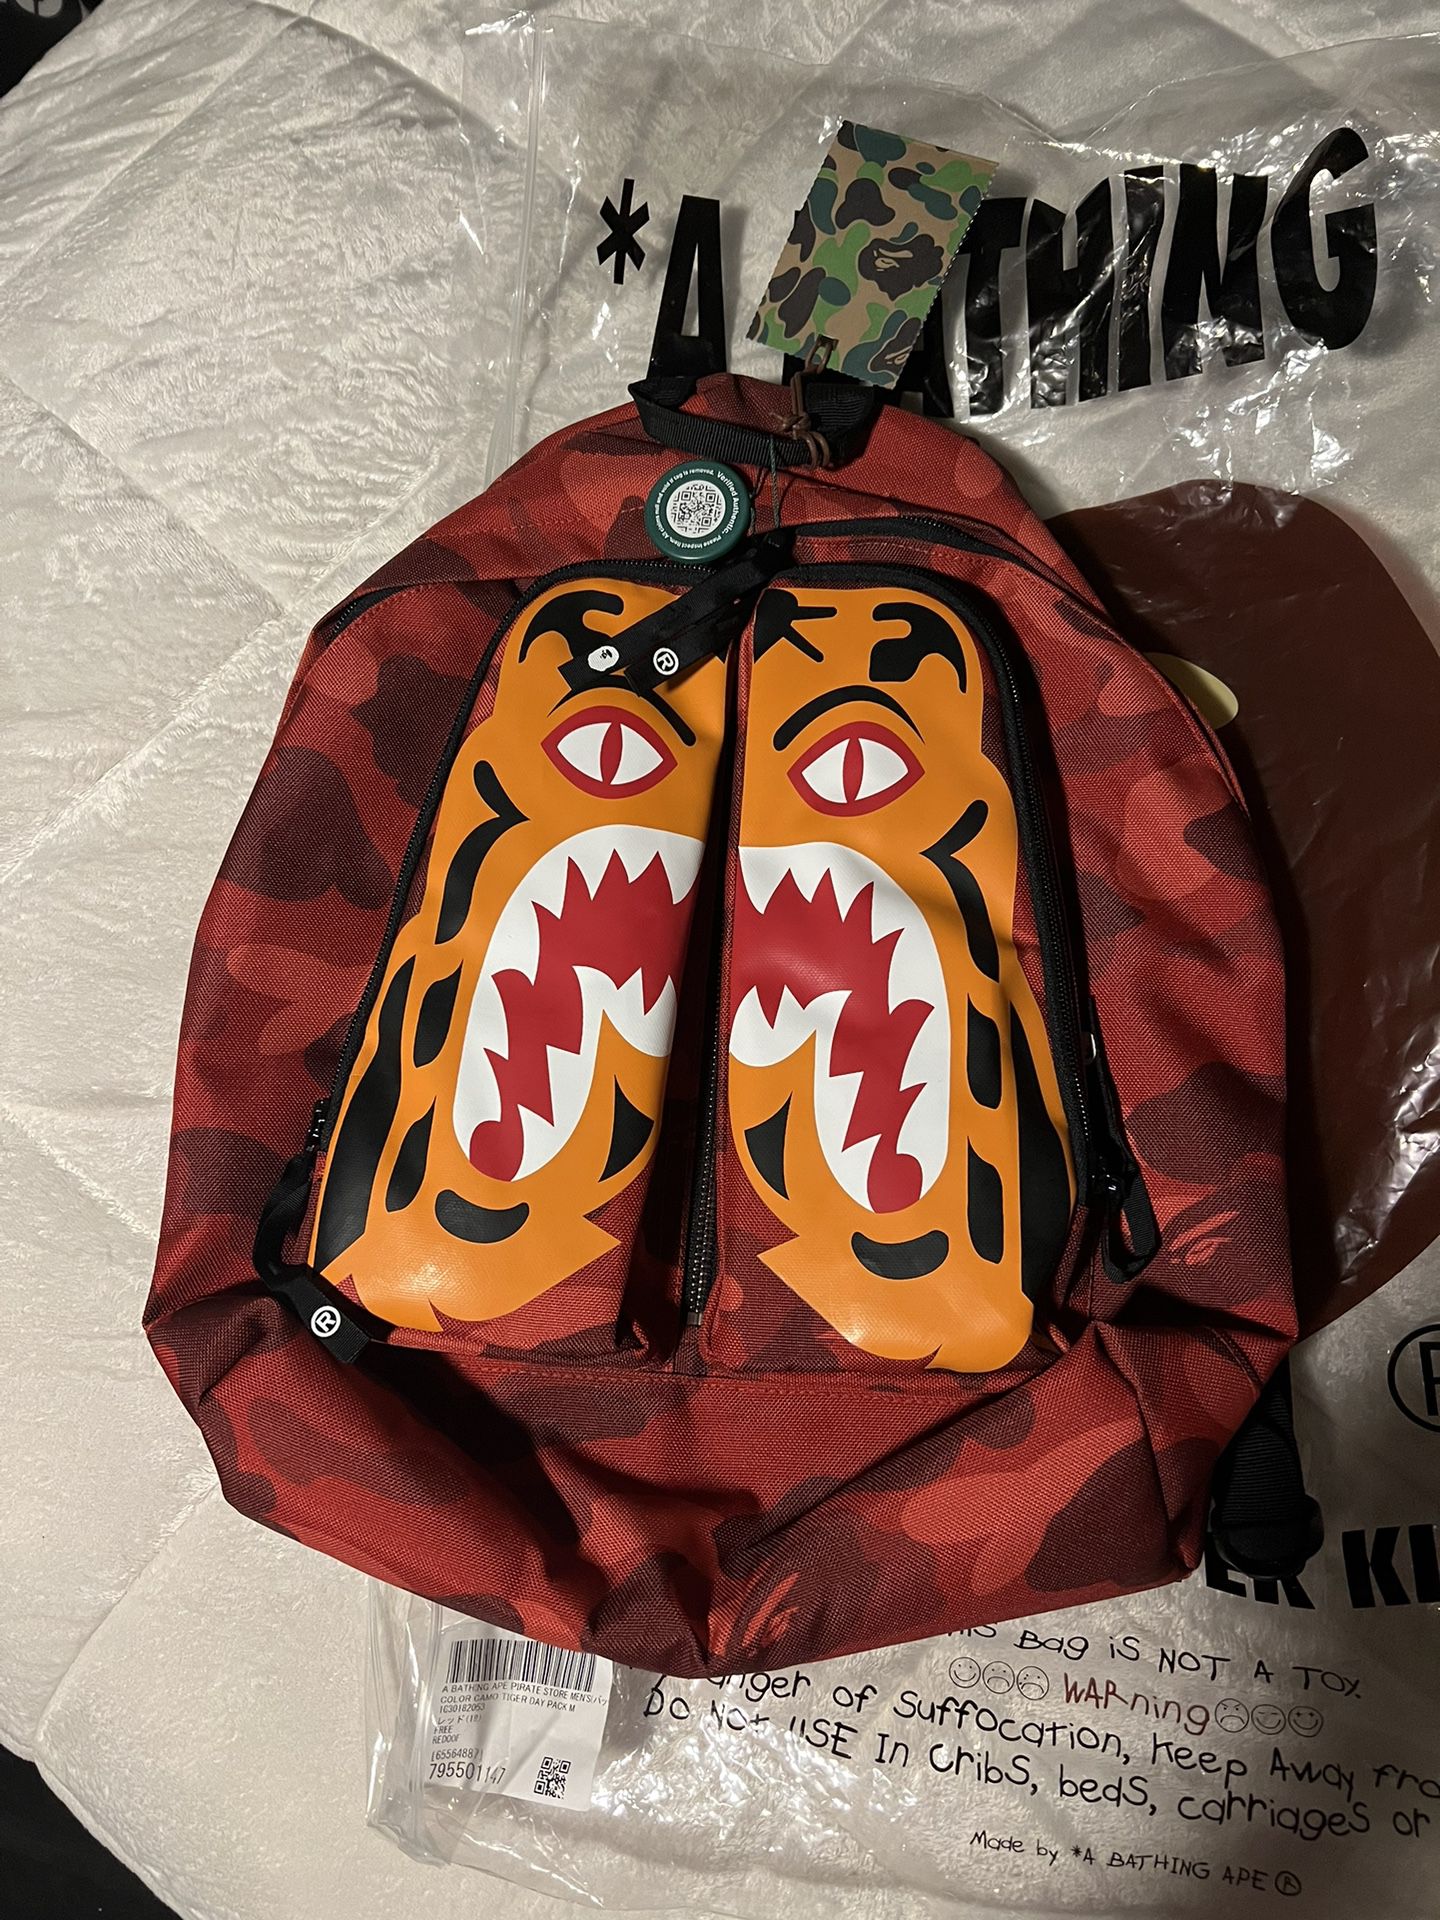 NEW A BATHING APE backpack COLOR CAMO TIGER DAY PACK M Shipped